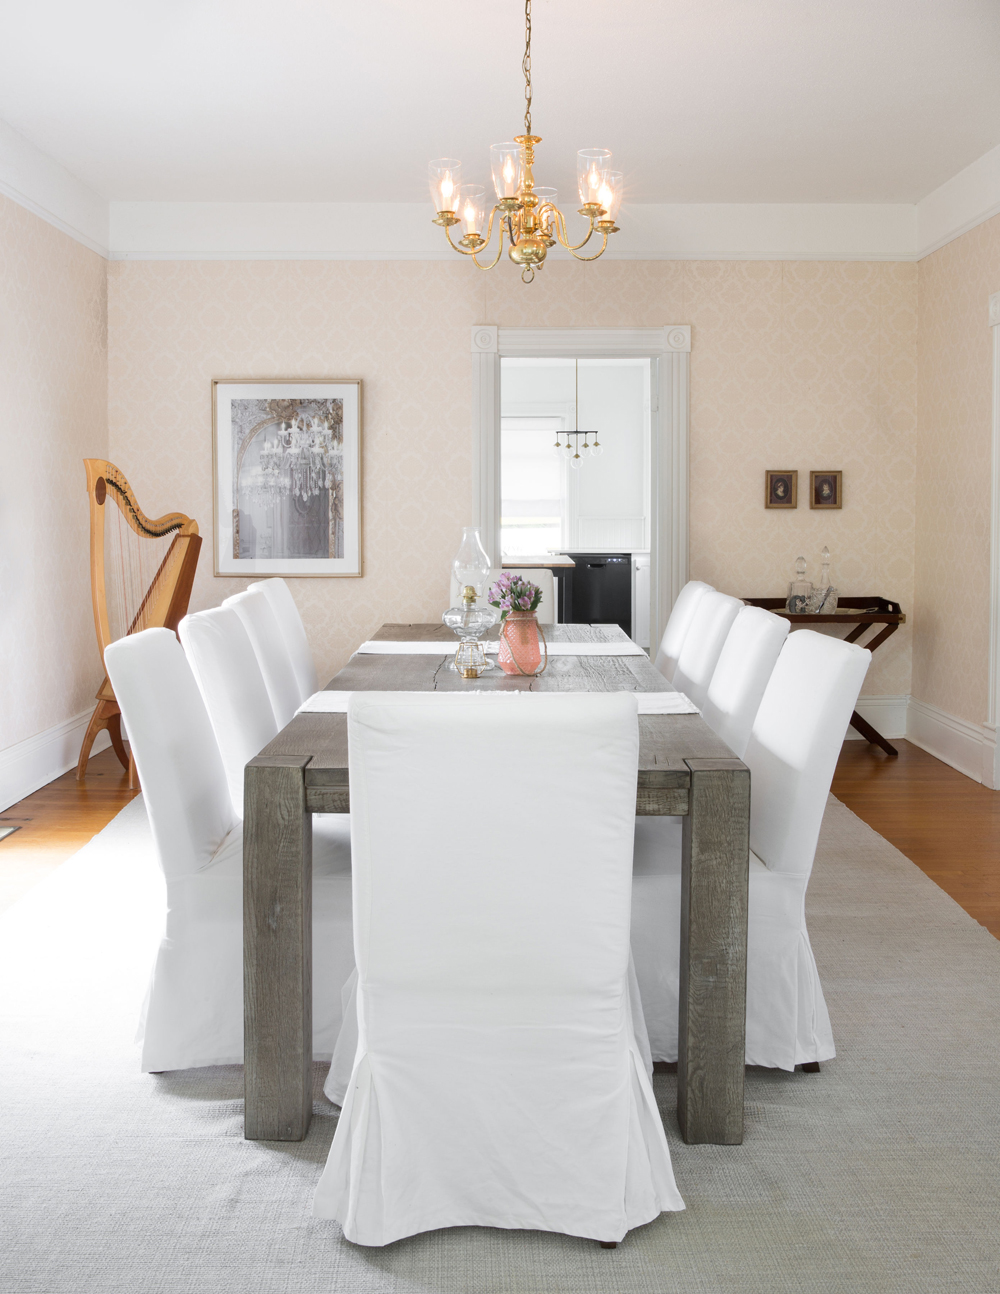 Large harvest table in the dining room that can seat 12 guests